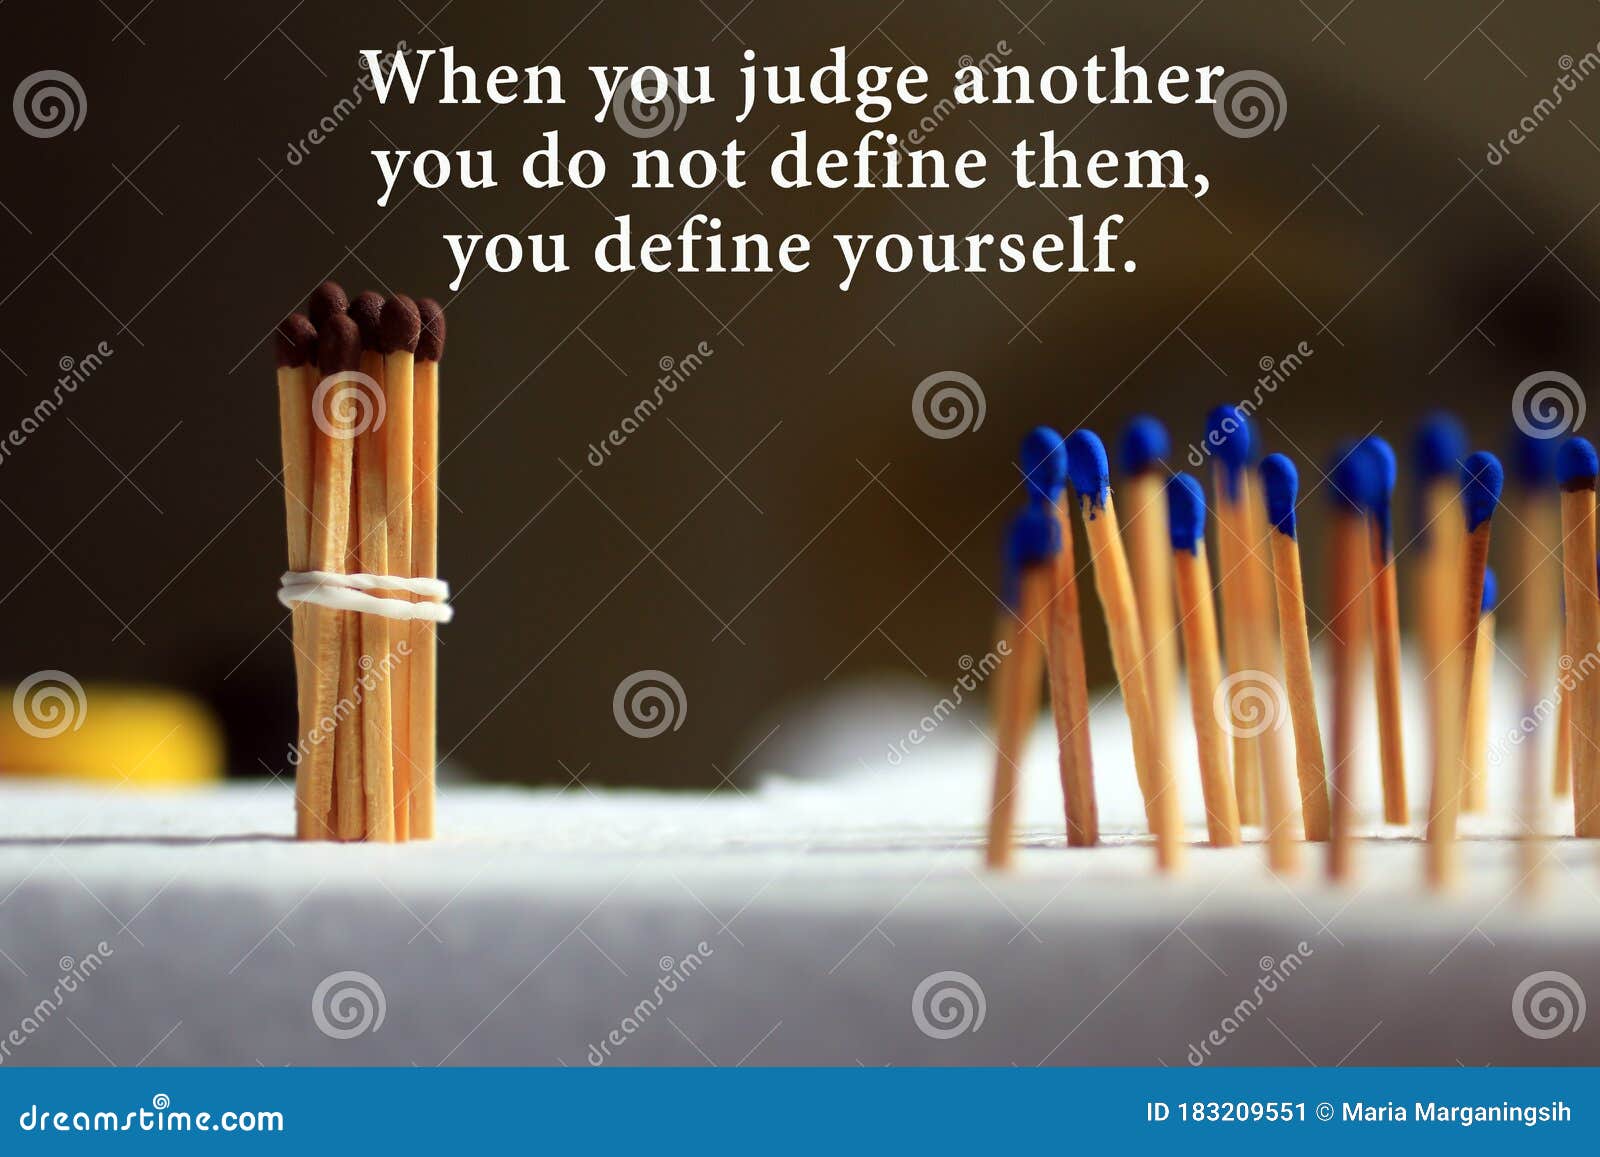 inspirational quote - when you judge another, you do not define them, you define yourself. with background of colorful matches.